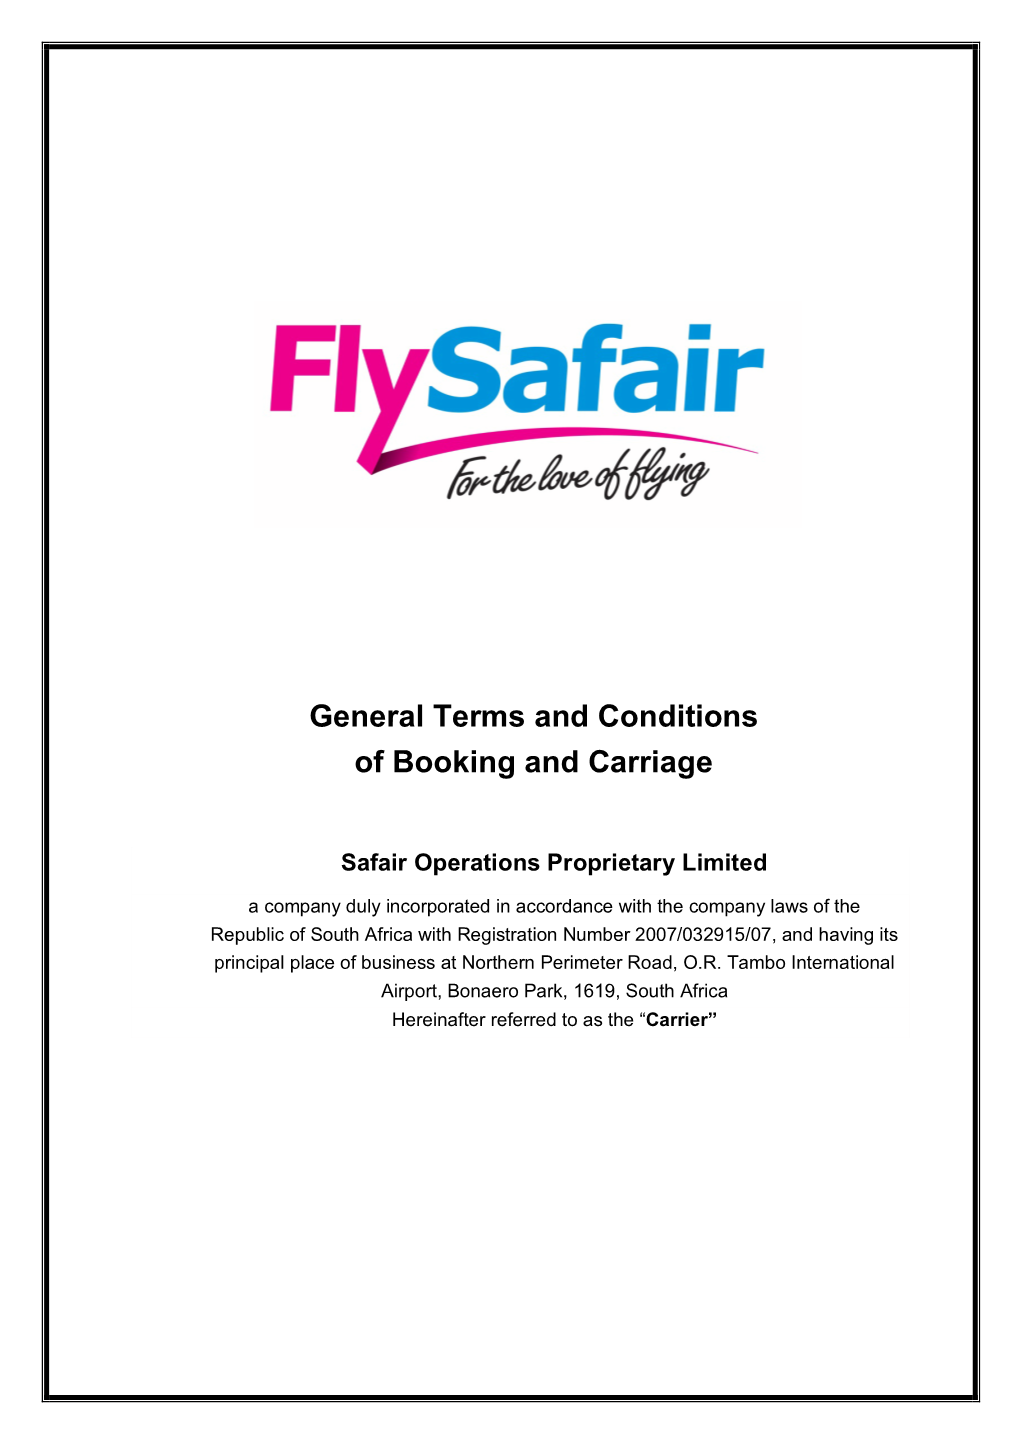 General Terms and Conditions of Booking and Carriage